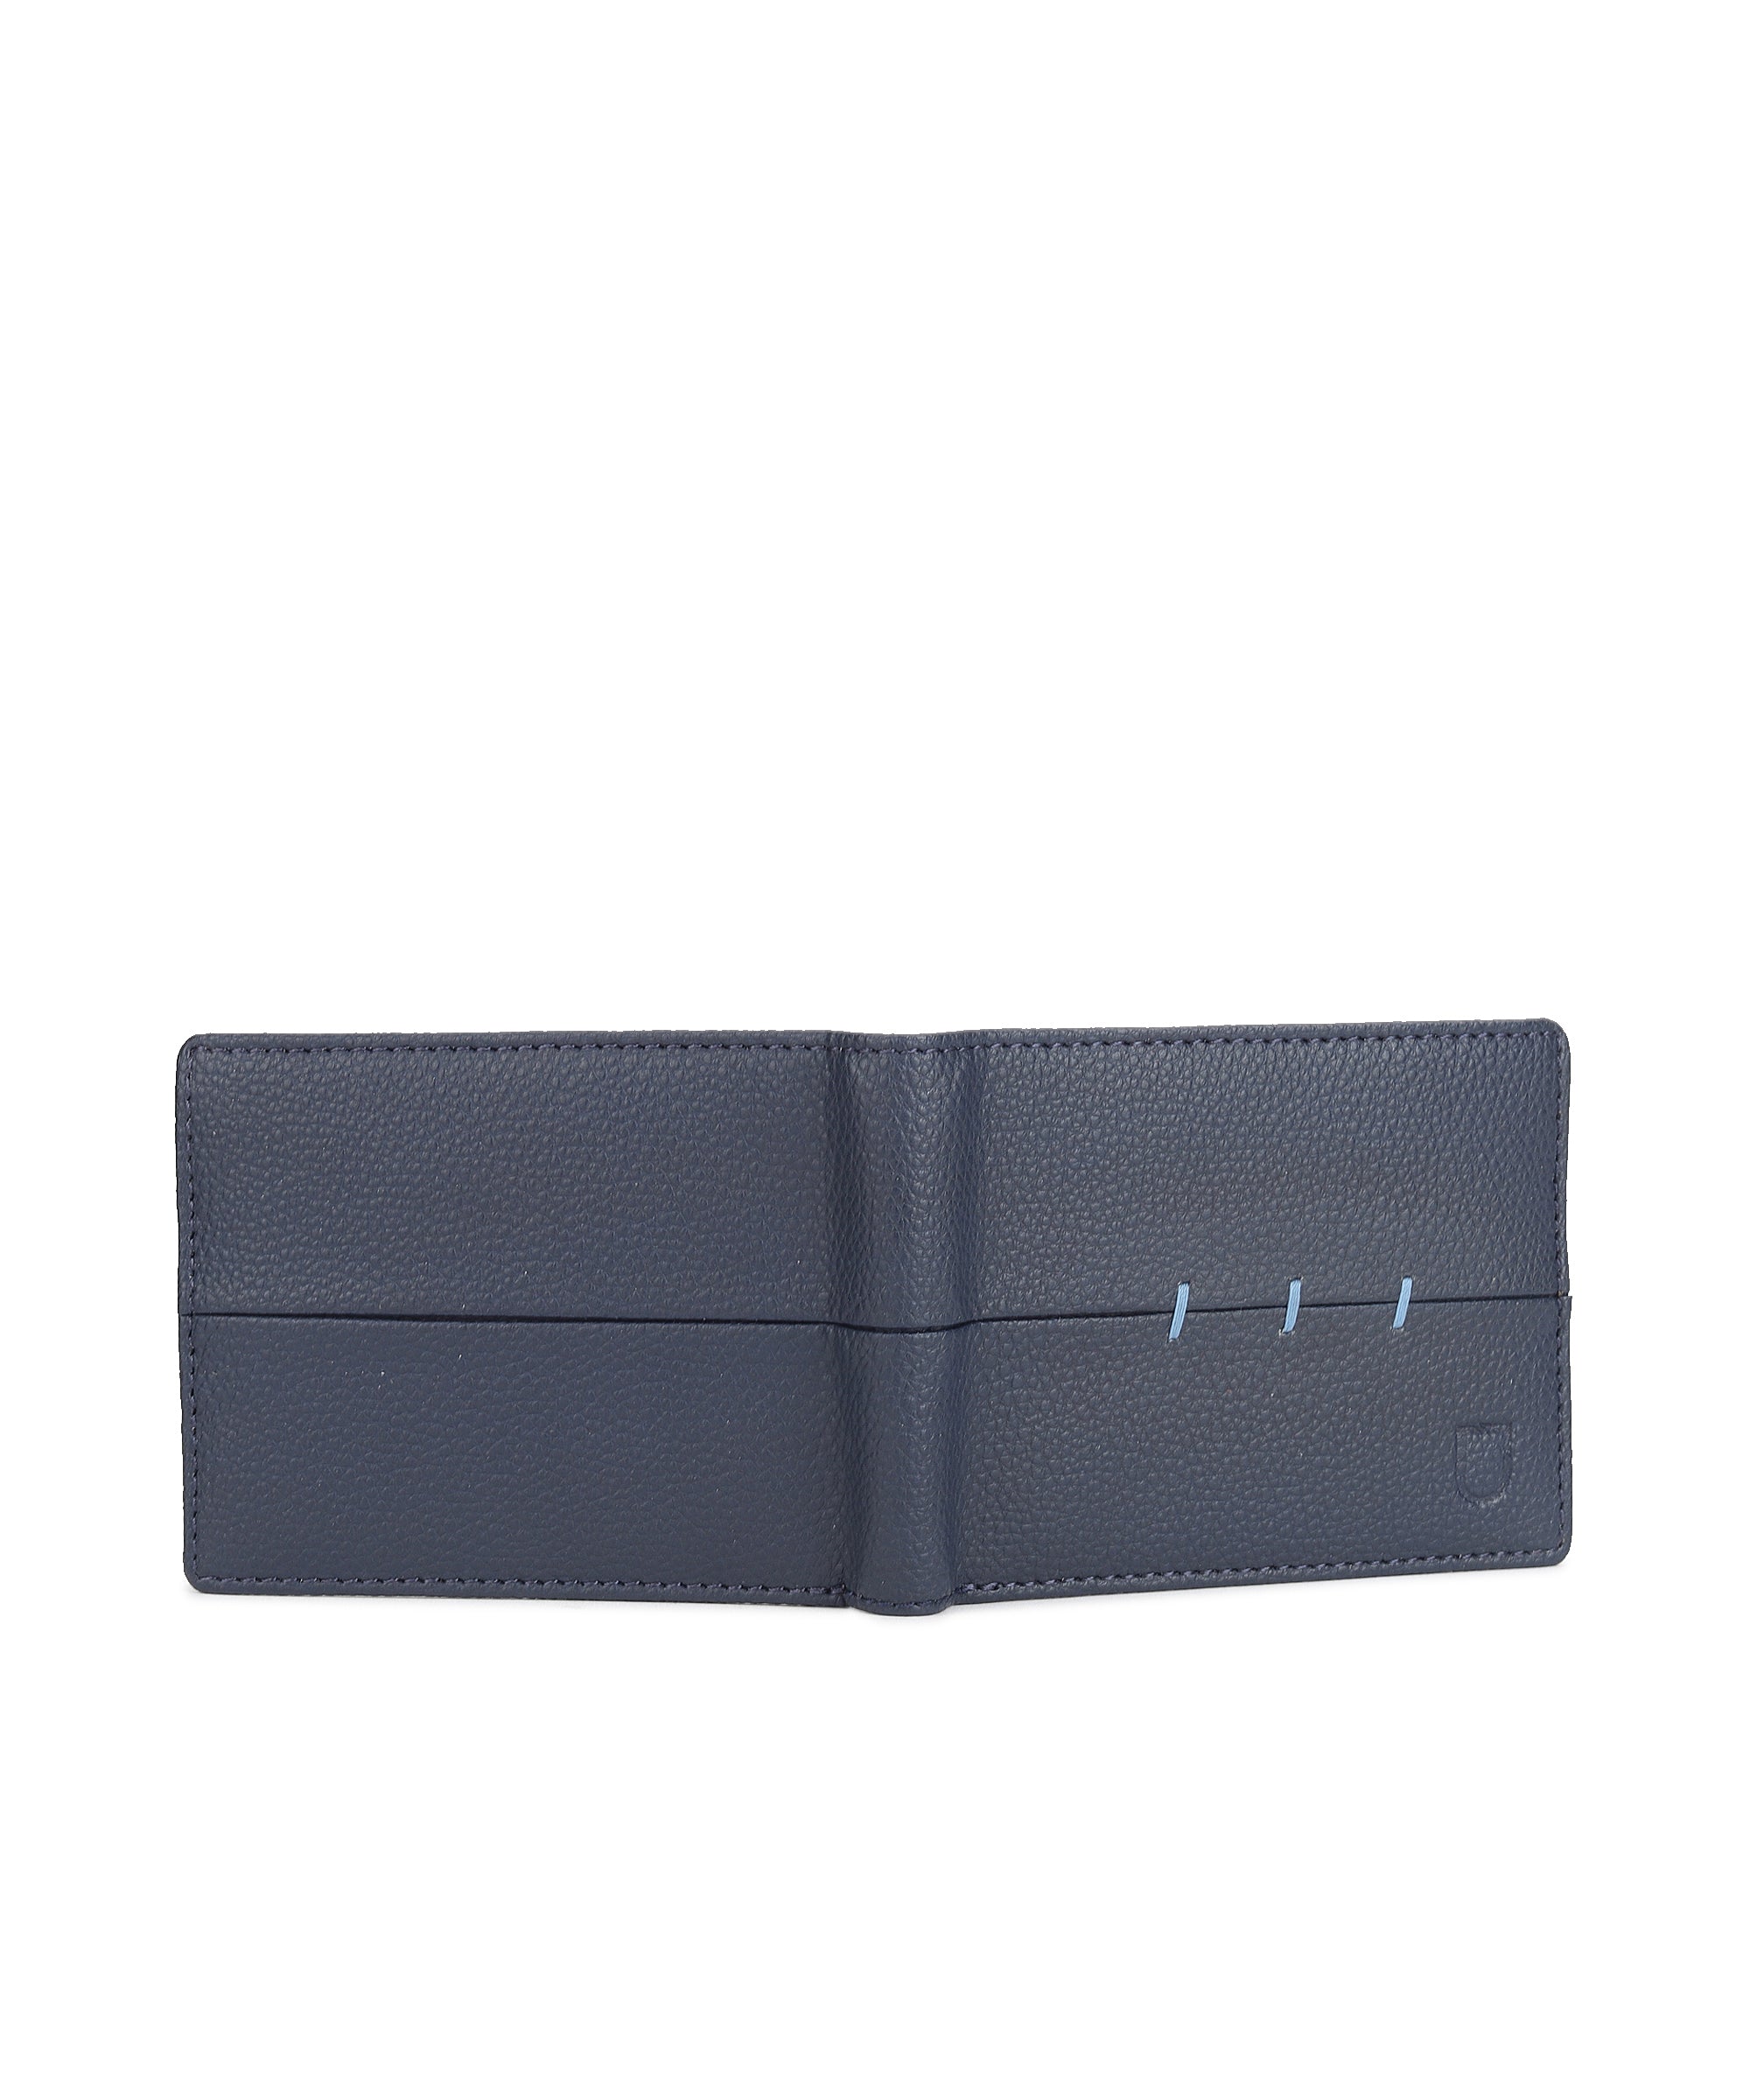 Urbano Fashion Men's Blue Casual, Formal Leather Wallet-6 Card Slots